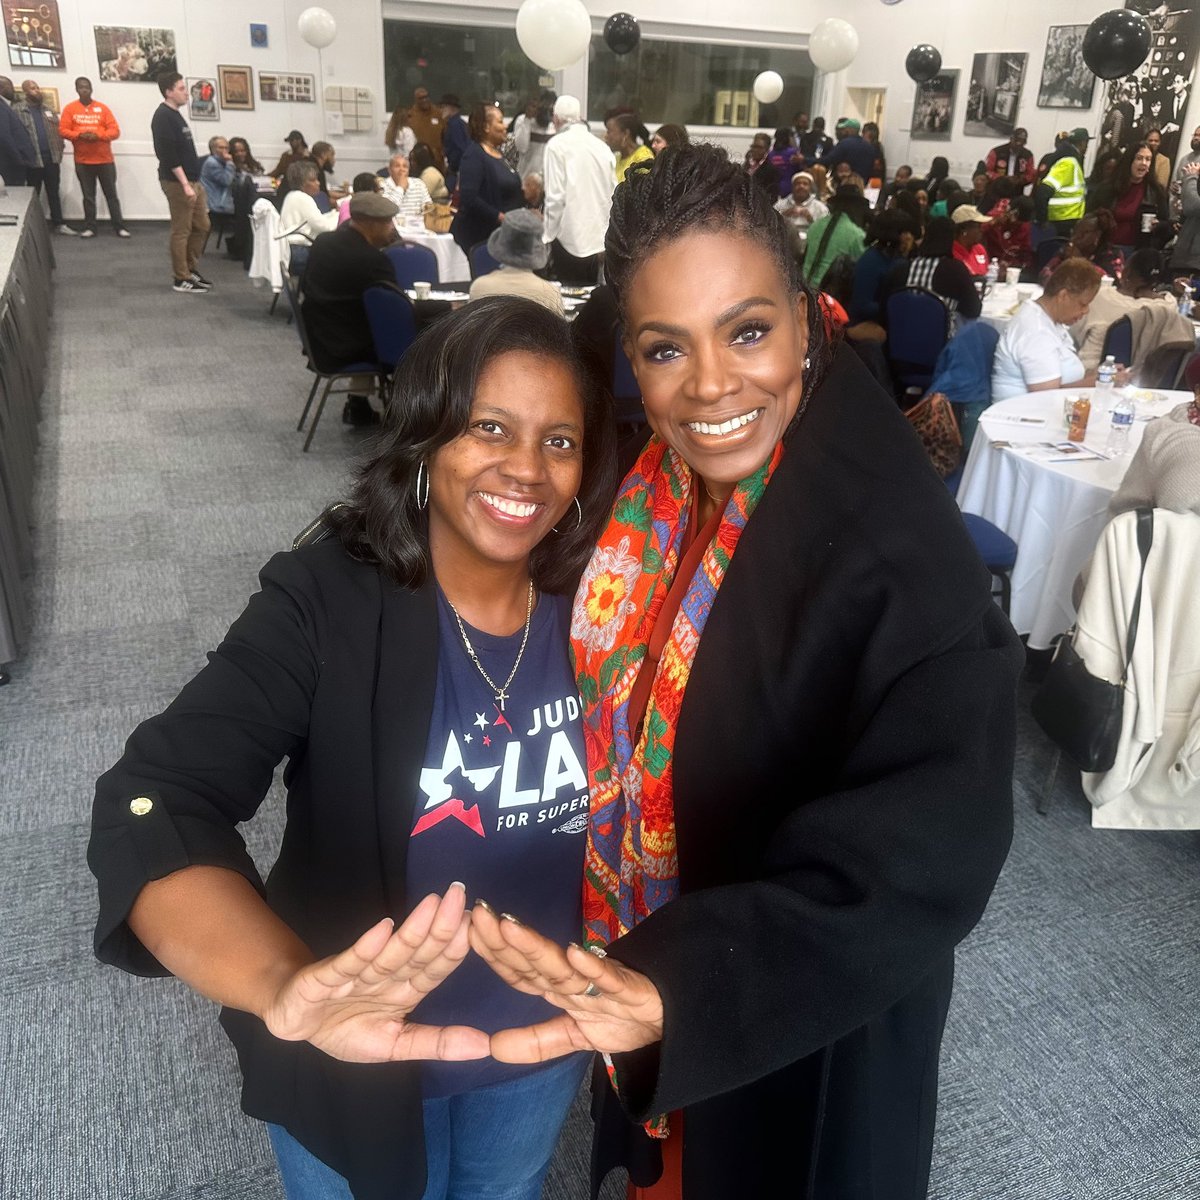 Abbot Elementary star @thesherylralph and I here — reminding everyone to get out and vote tomorrow for myself and highly recommended judges for Pennsylvania’s courts. Who’s with us? 🫶🏾🗳️🇺🇸❤️

#JudgesMatter #CourtsMatter #VotingMatters